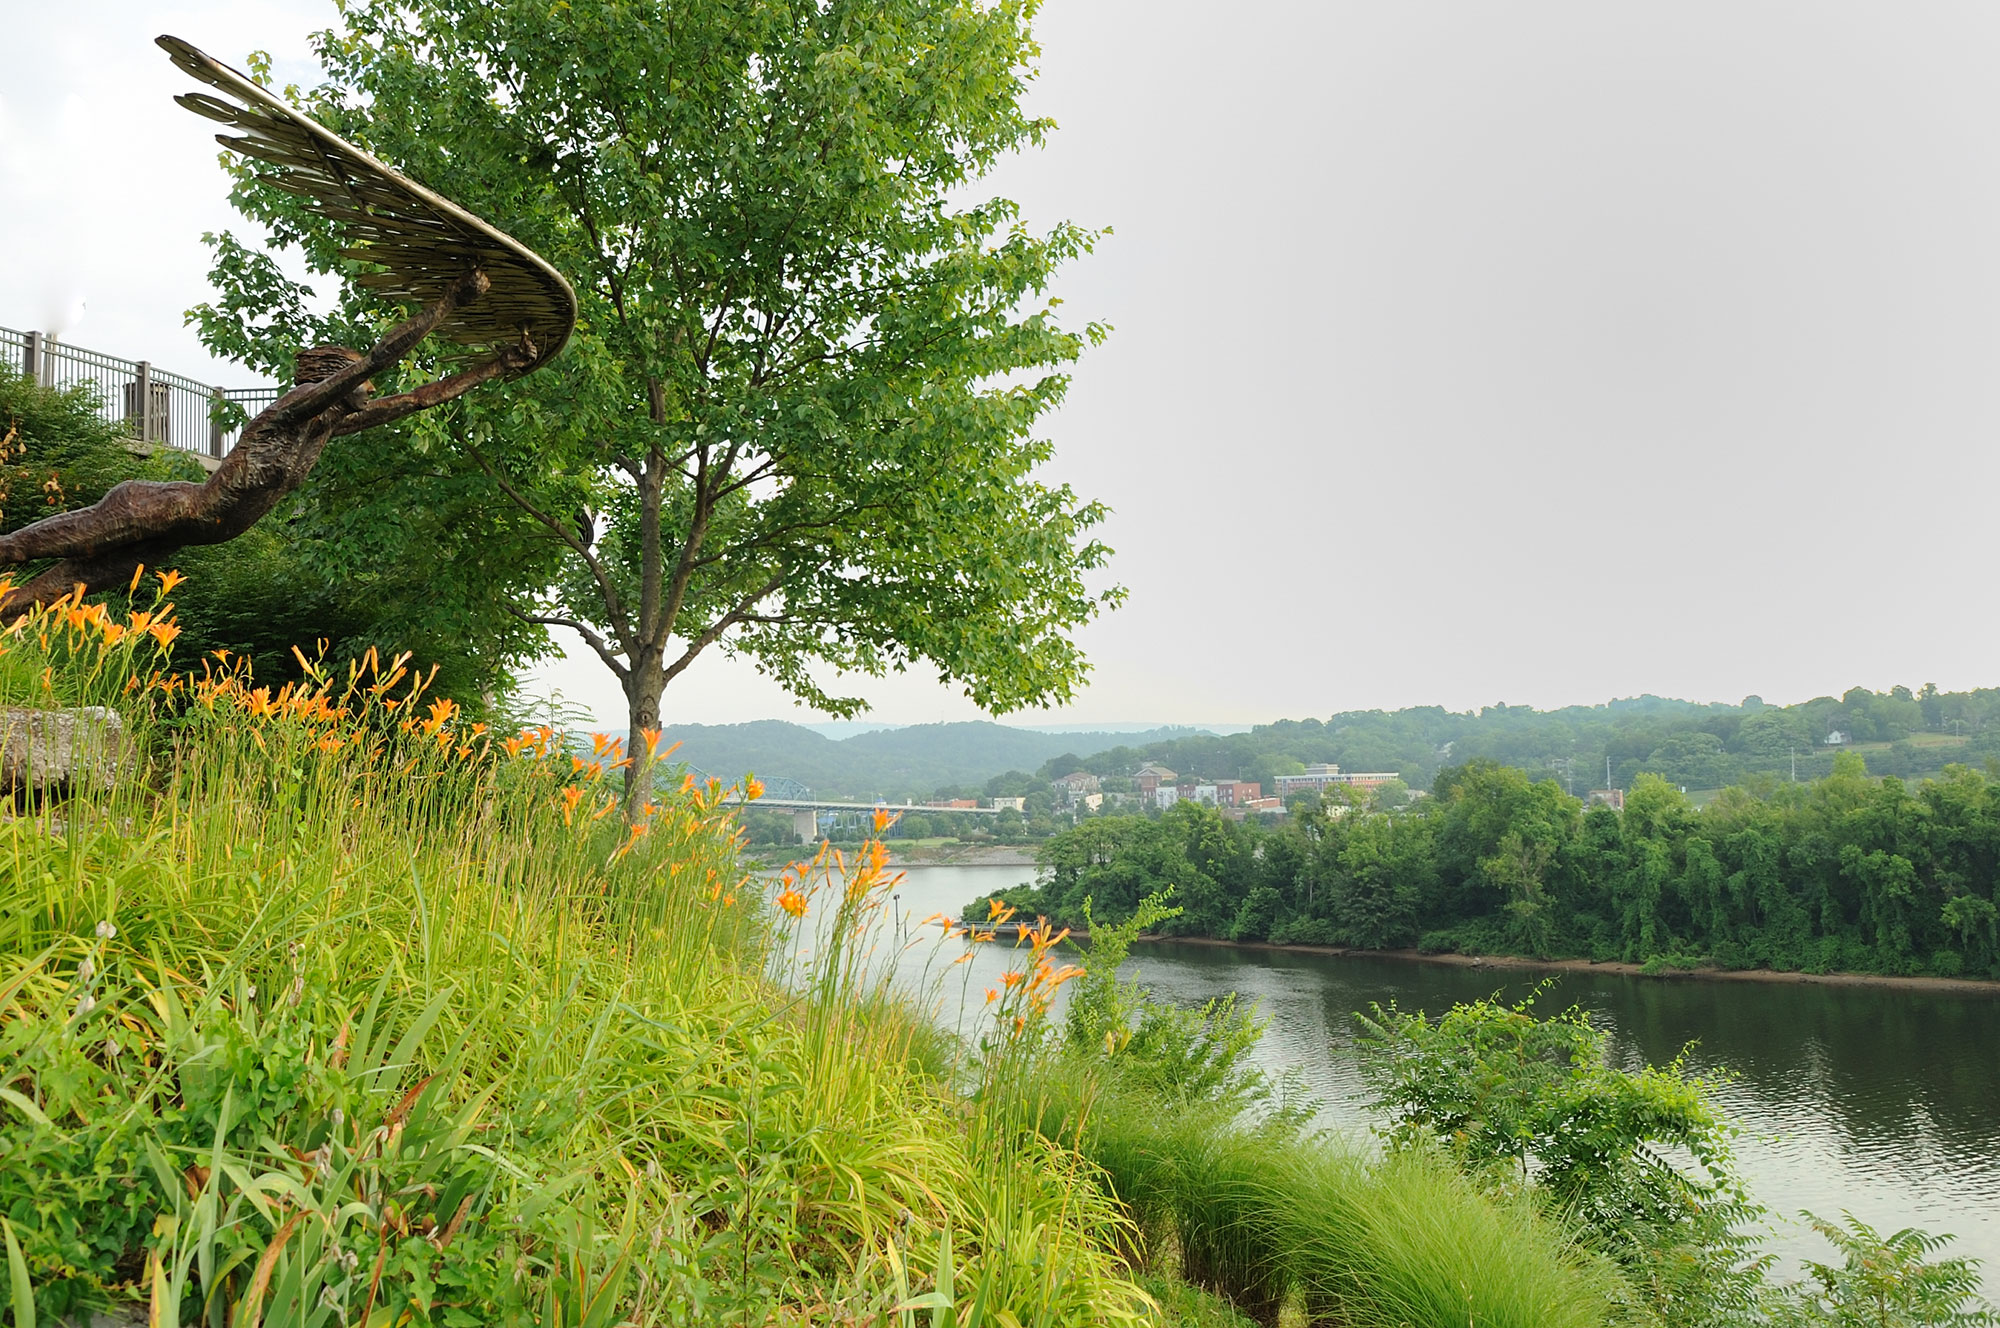 A statue of an eagle on top of a hill next to a river.